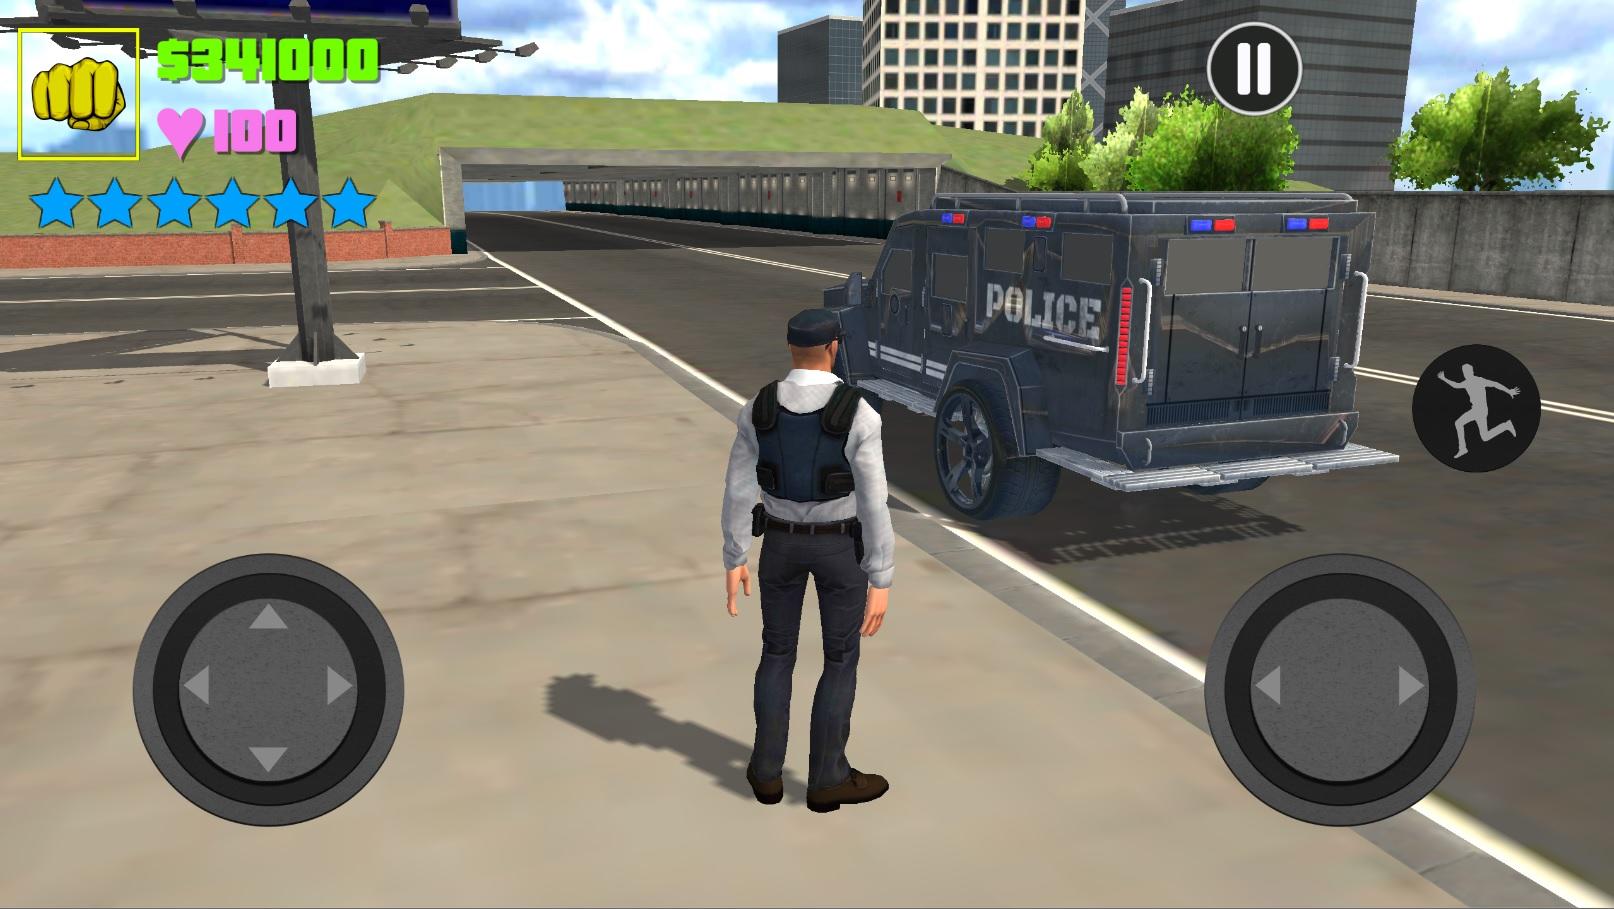 Screenshot 1 of US Armored Police Truck Drive: Autospiele 2021 